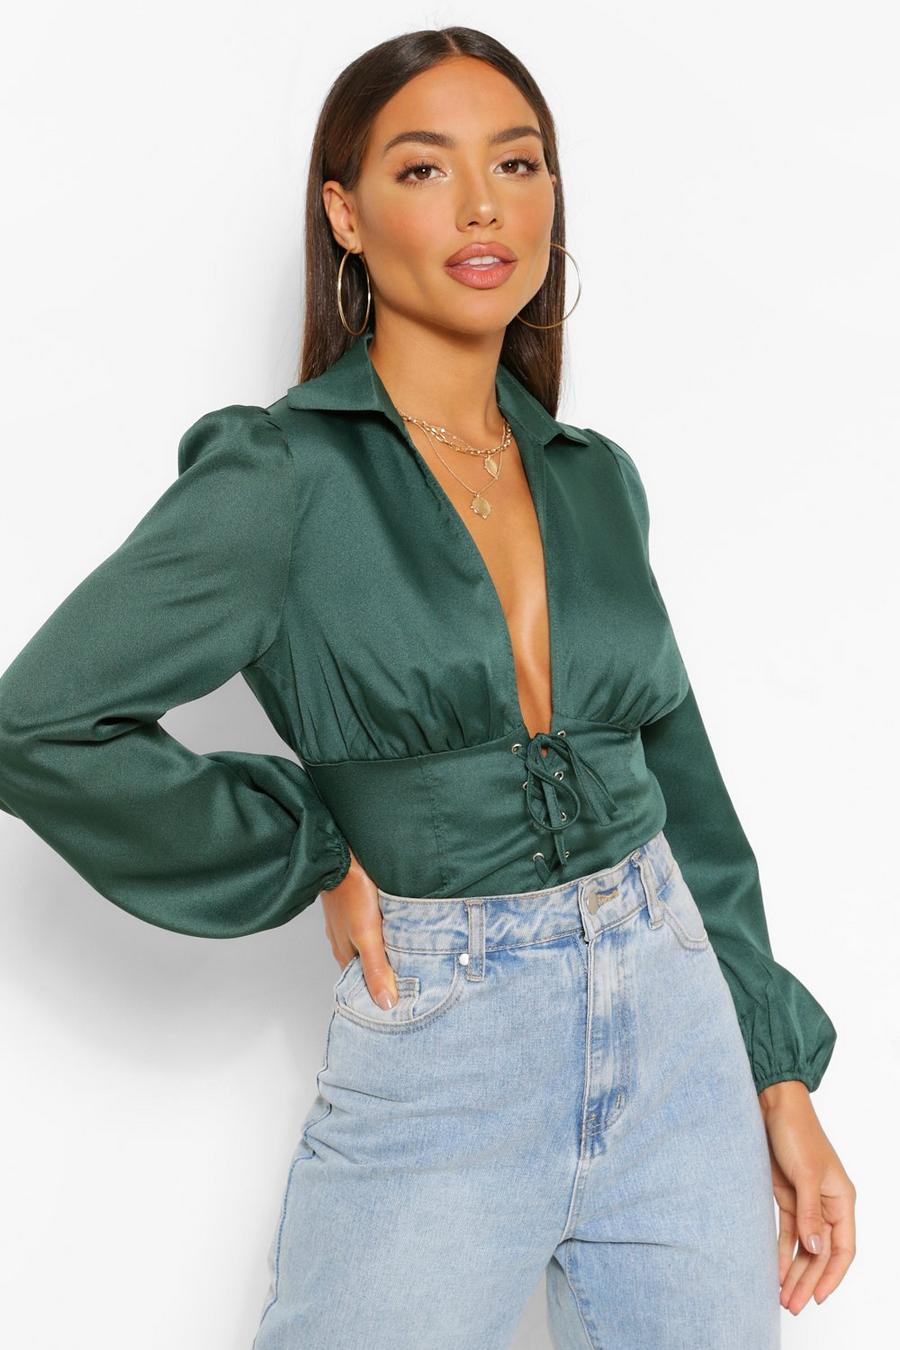 Emerald green Woven Lace Up Corset Top